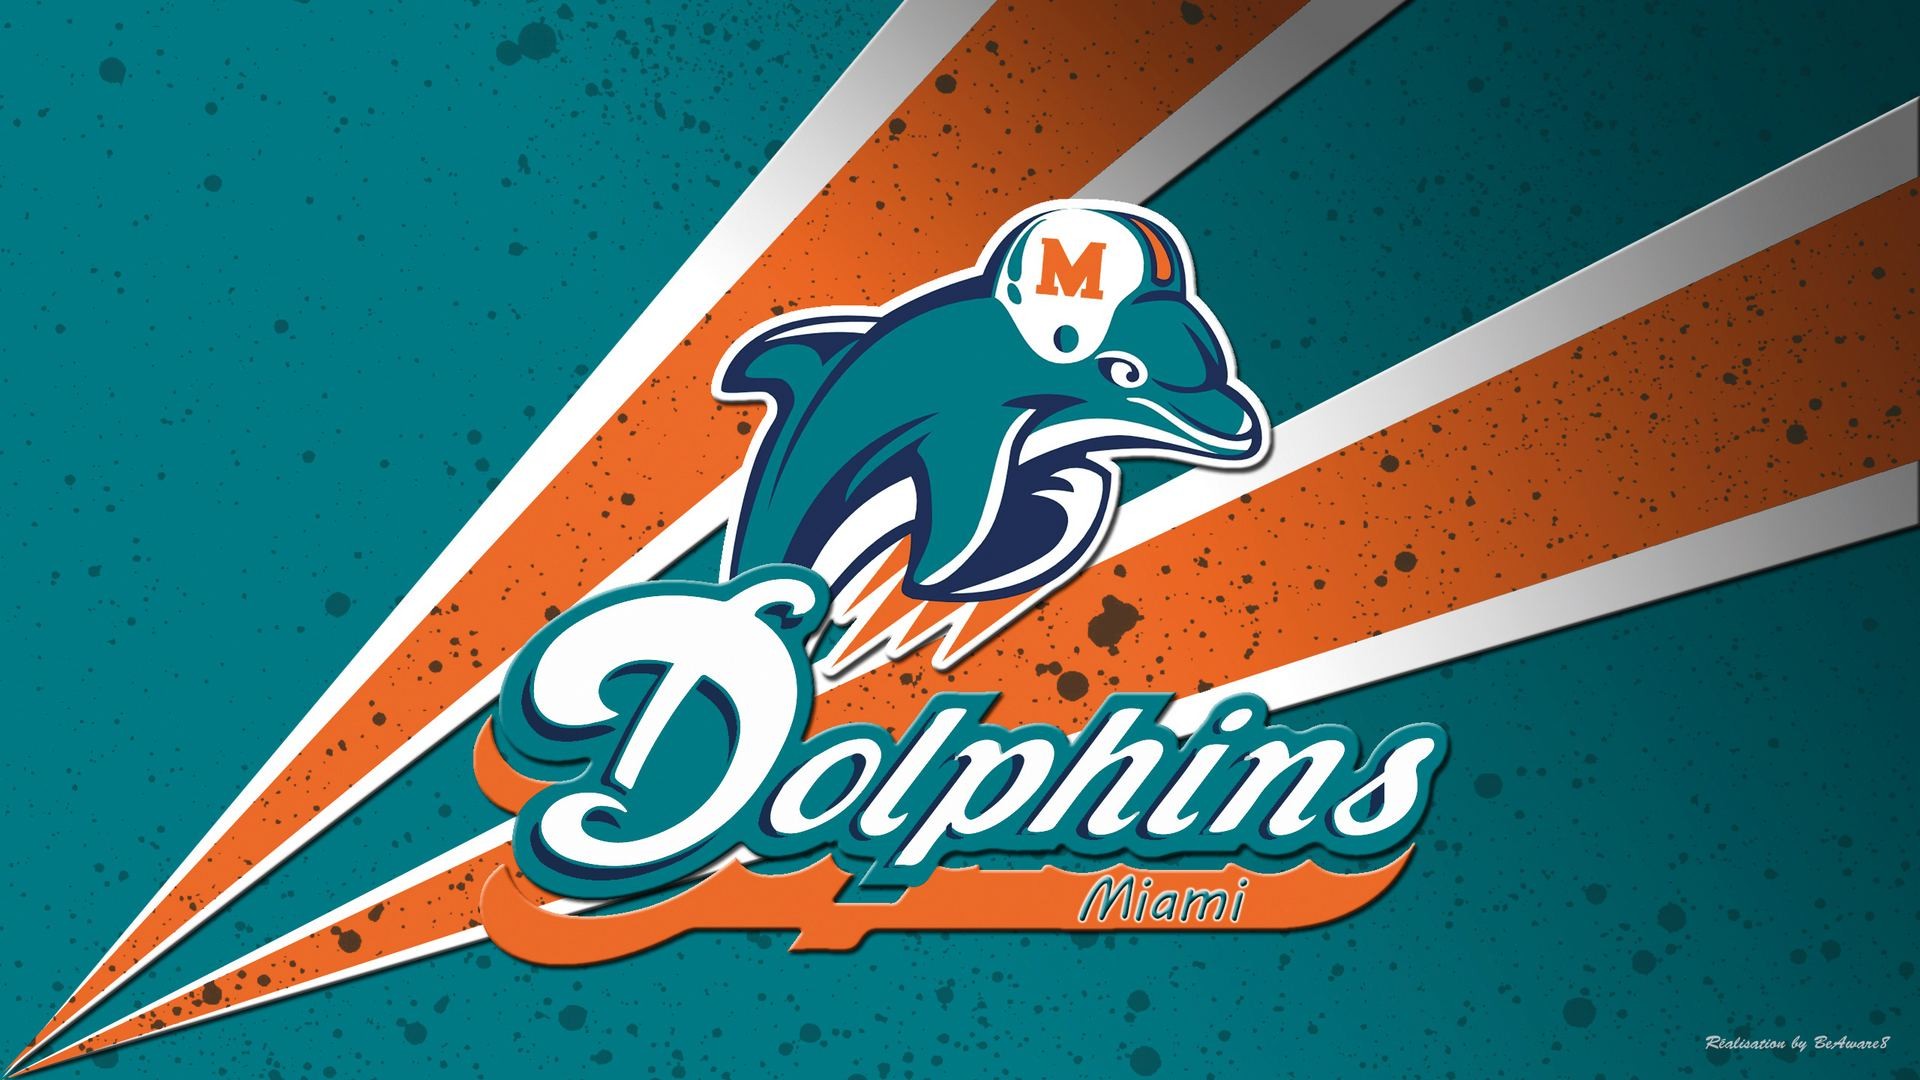 Wallpaper Desktop Miami Dolphins HD With Resolution 1920X1080 pixel. You can make this wallpaper for your Mac or Windows Desktop Background, iPhone, Android or Tablet and another Smartphone device for free